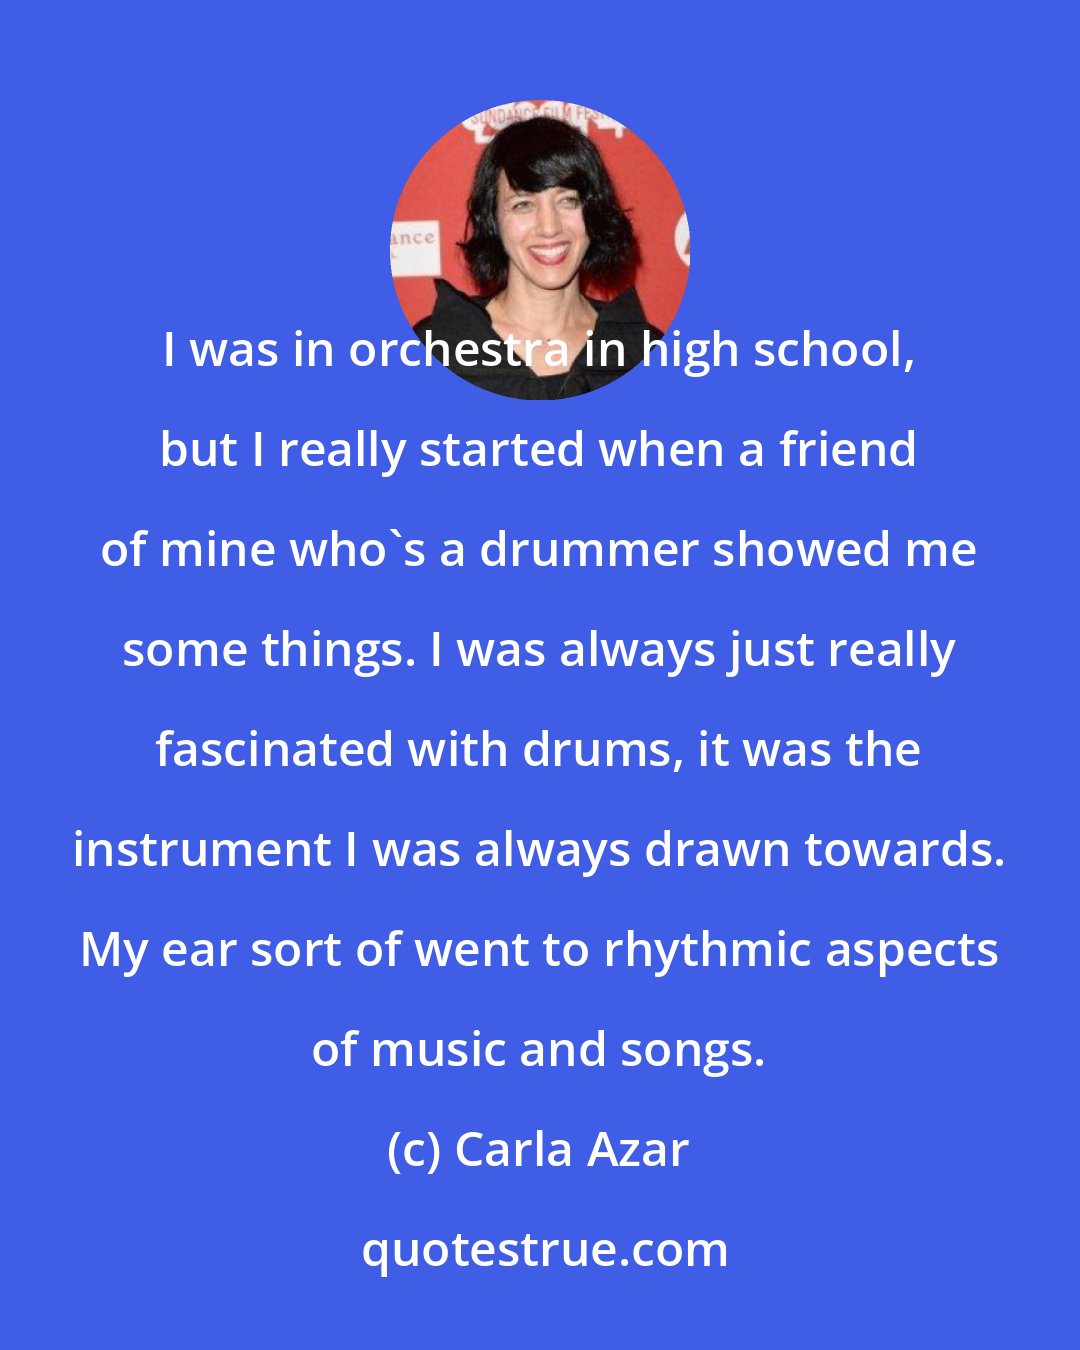 Carla Azar: I was in orchestra in high school, but I really started when a friend of mine who's a drummer showed me some things. I was always just really fascinated with drums, it was the instrument I was always drawn towards. My ear sort of went to rhythmic aspects of music and songs.